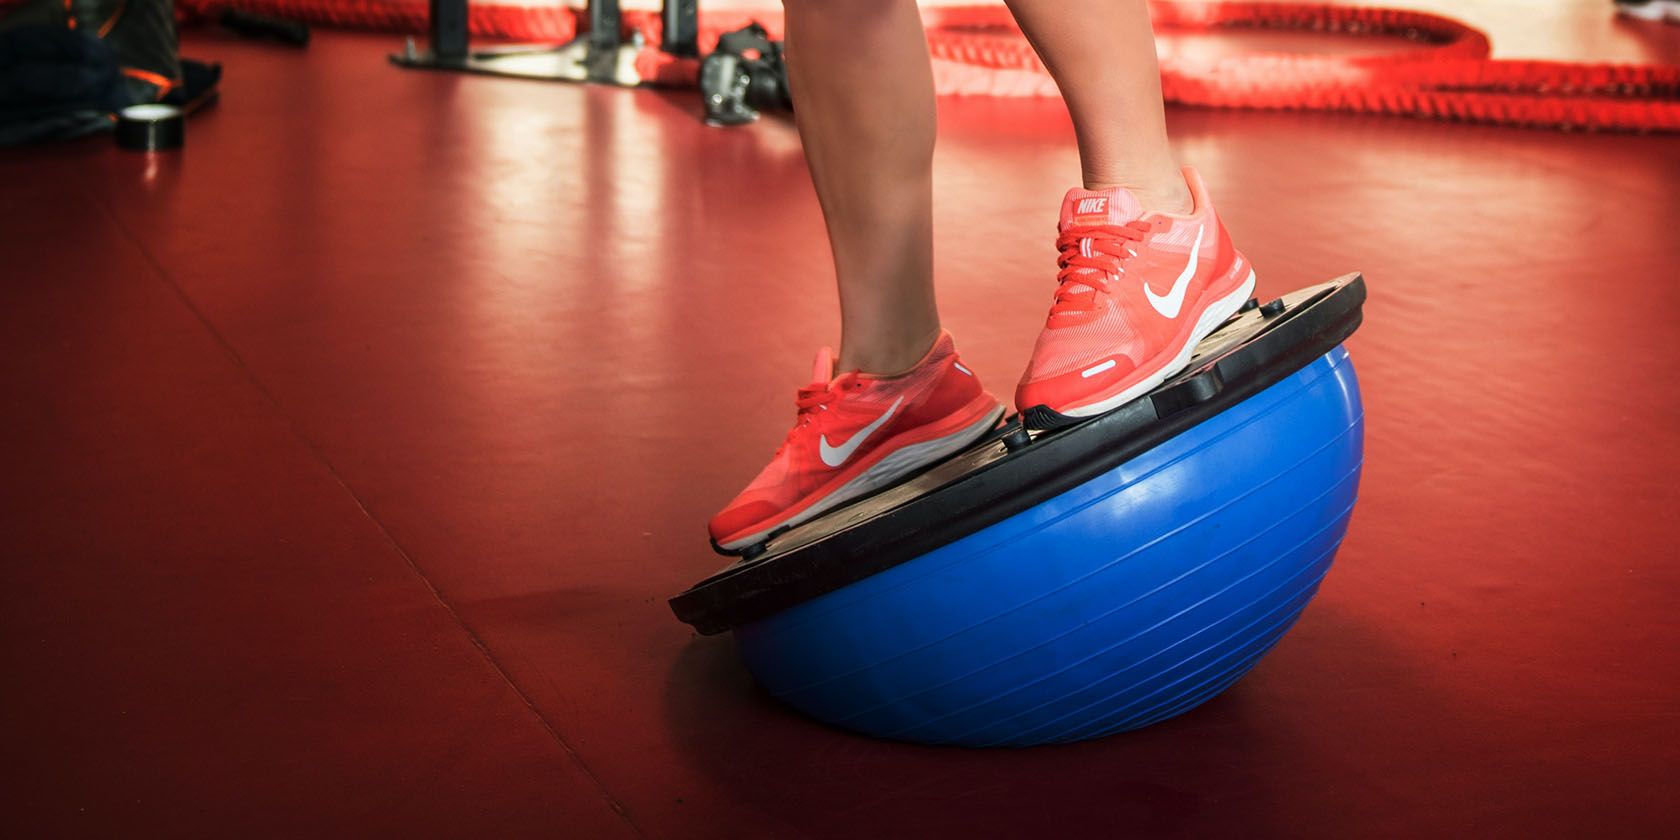 The 5 Best Apps for BOSU Ball Workouts That Build Balance and Strength